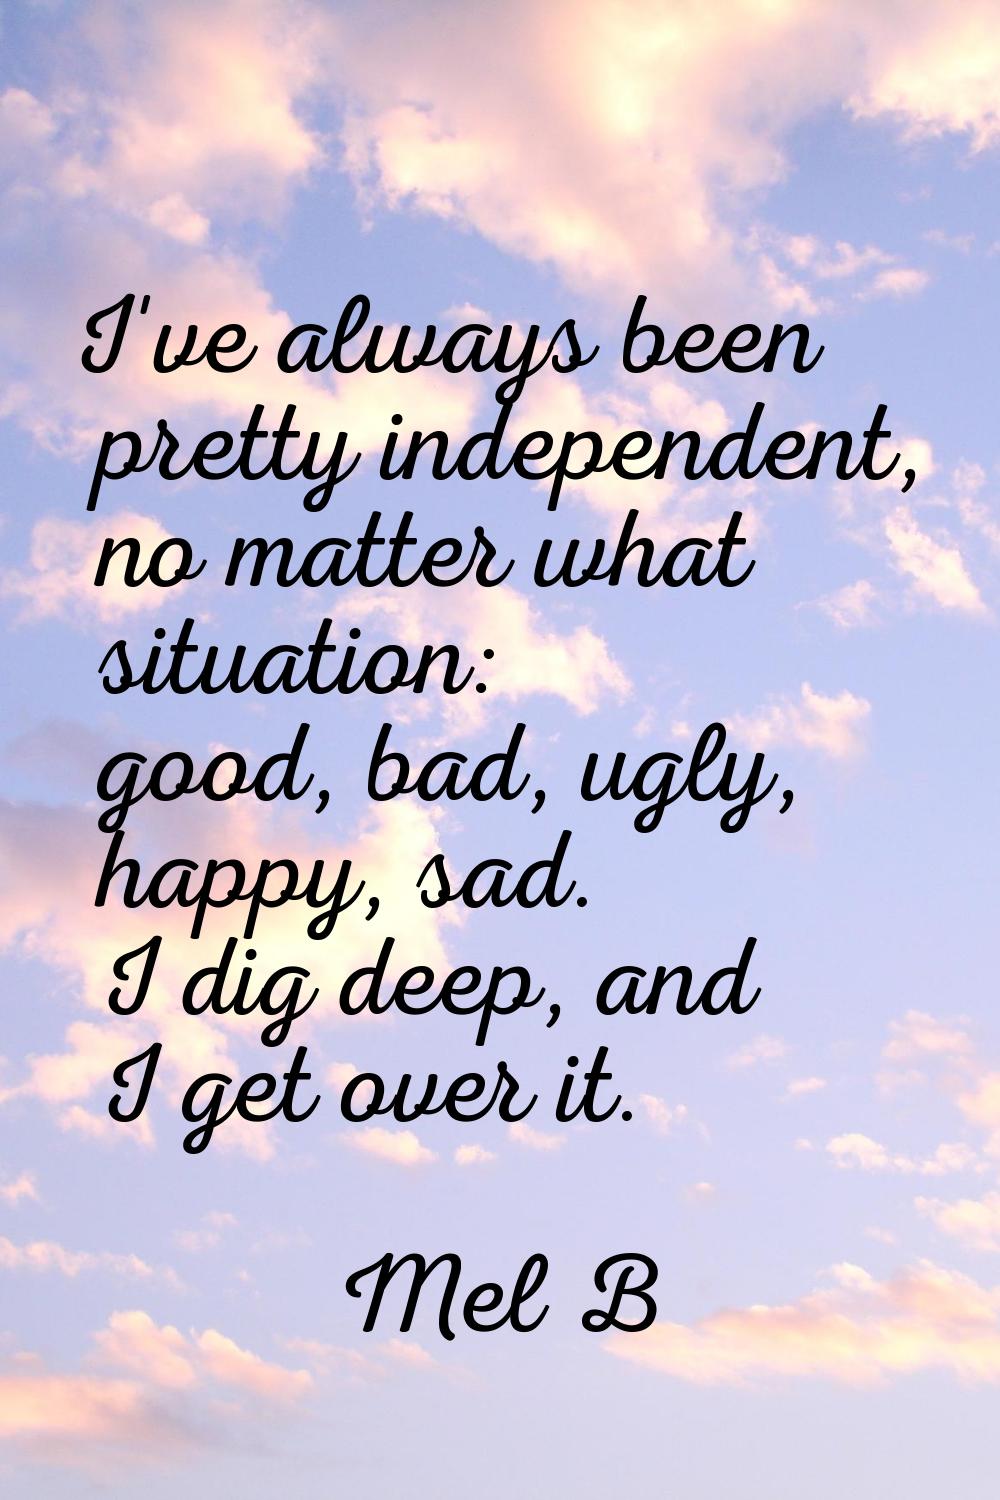 I've always been pretty independent, no matter what situation: good, bad, ugly, happy, sad. I dig d